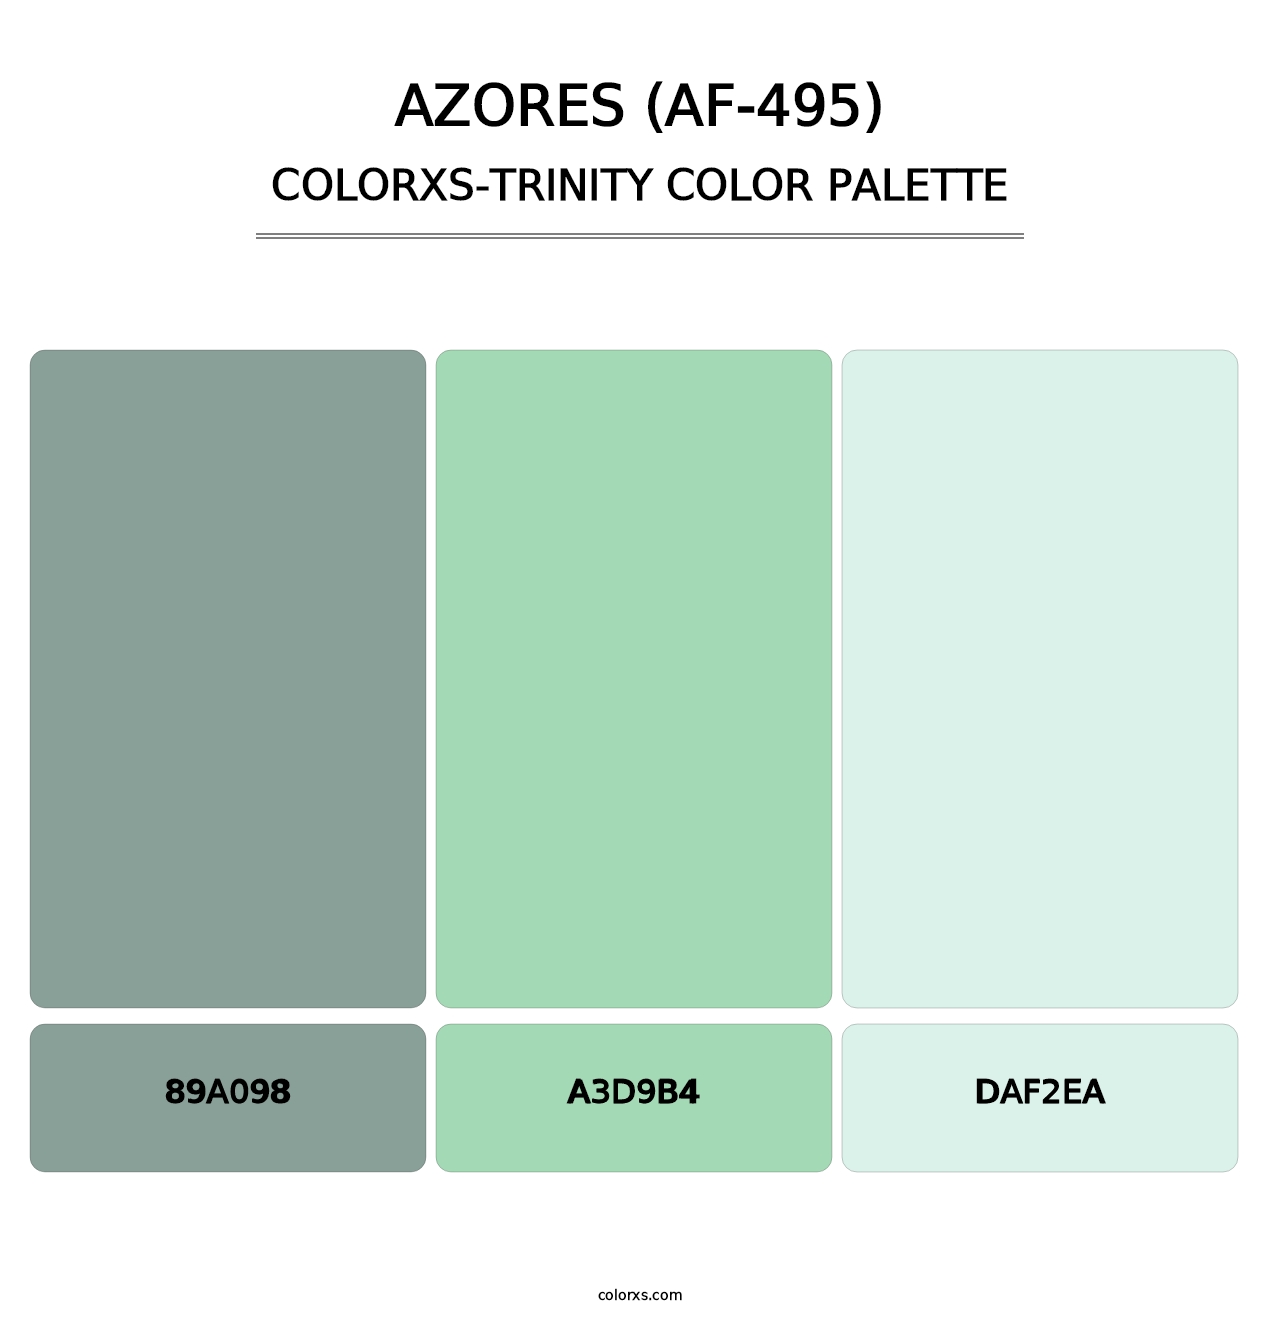 Azores (AF-495) - Colorxs Trinity Palette